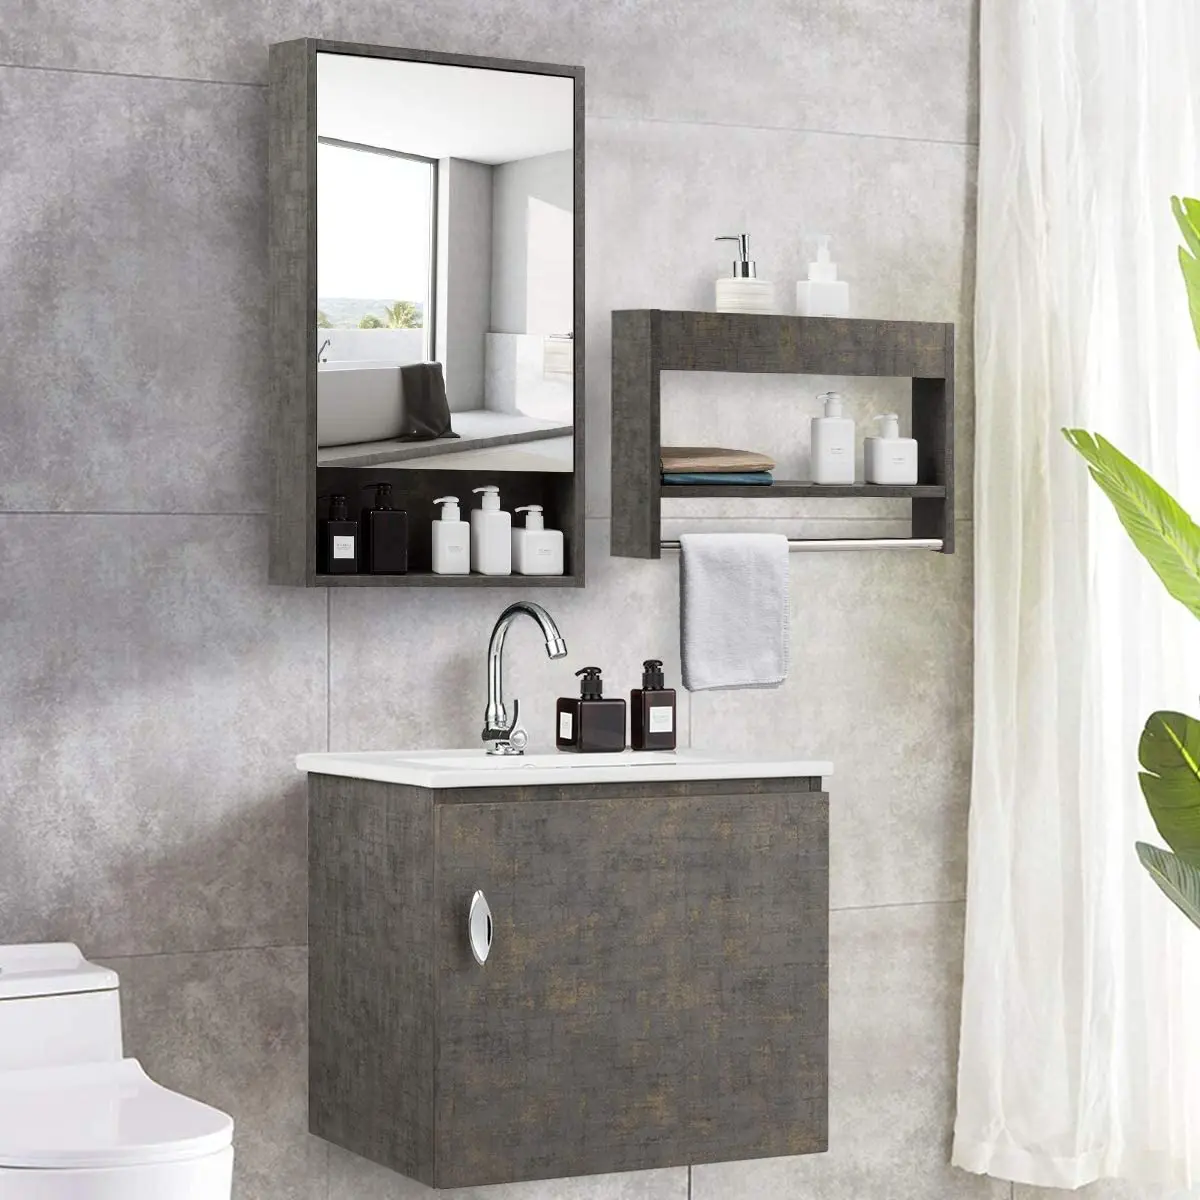 Bathroom Vanity Cabinet Sizes And Styles Guide KraftMaid, 43% OFF